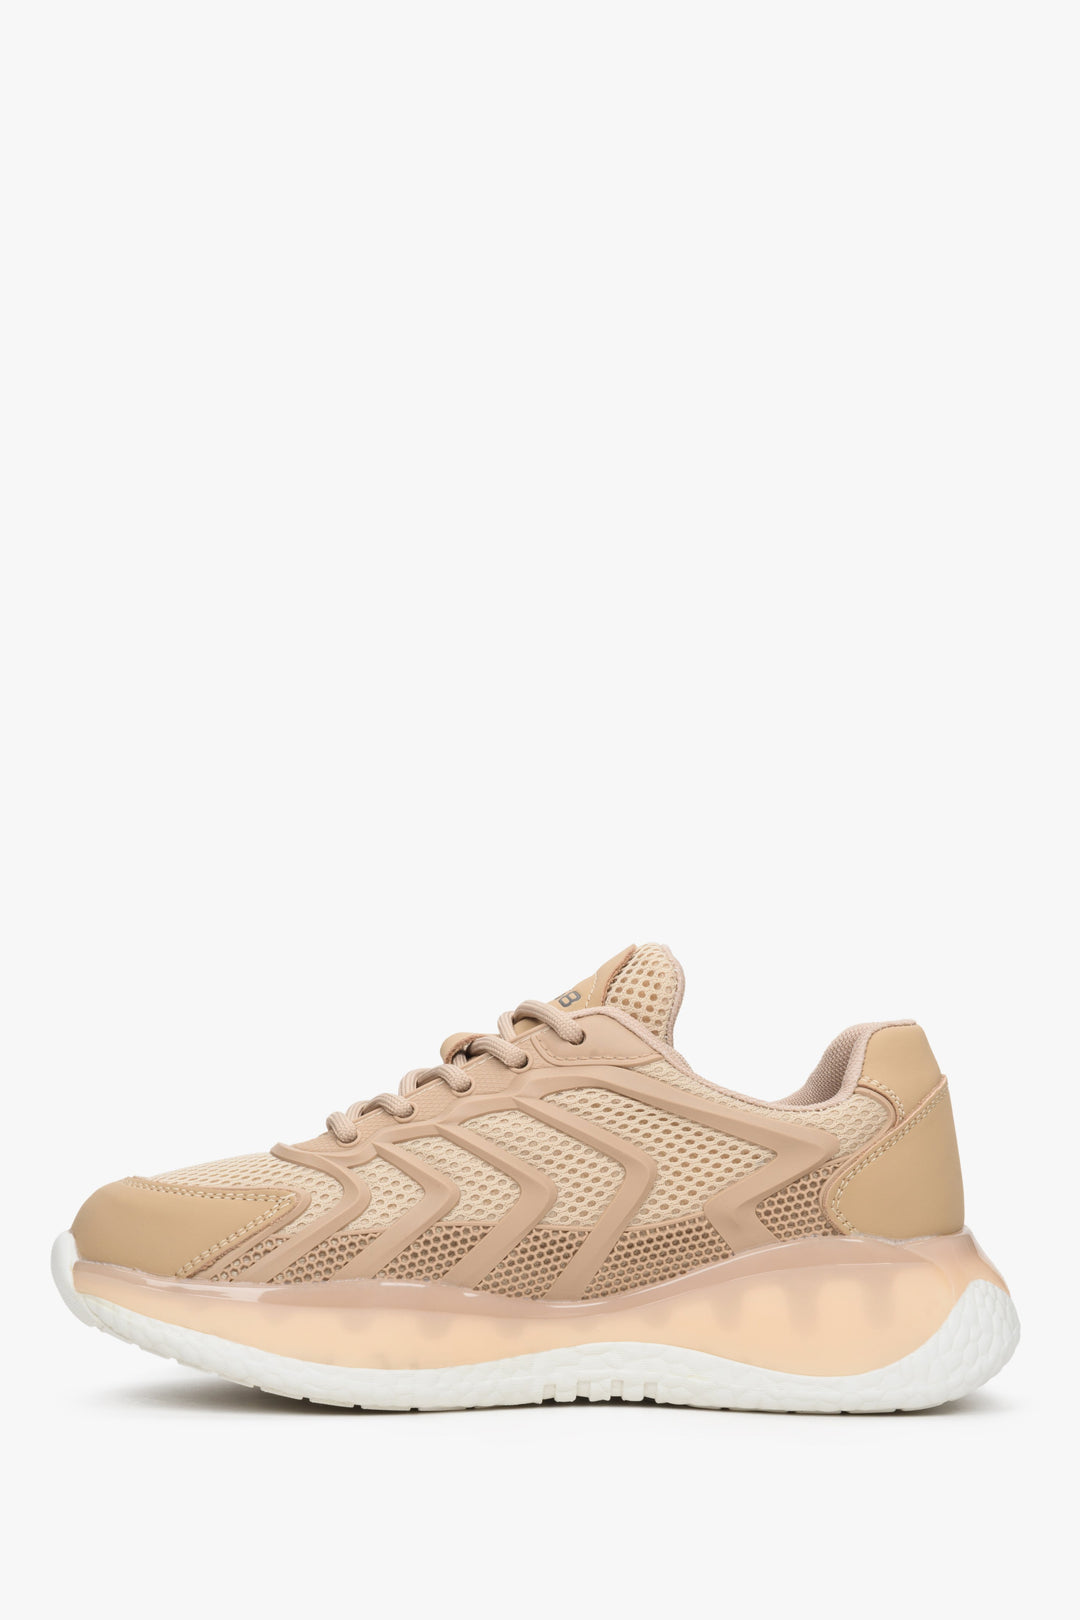 Women's beige sneakers with a thick sole by Estro - shoe profile.